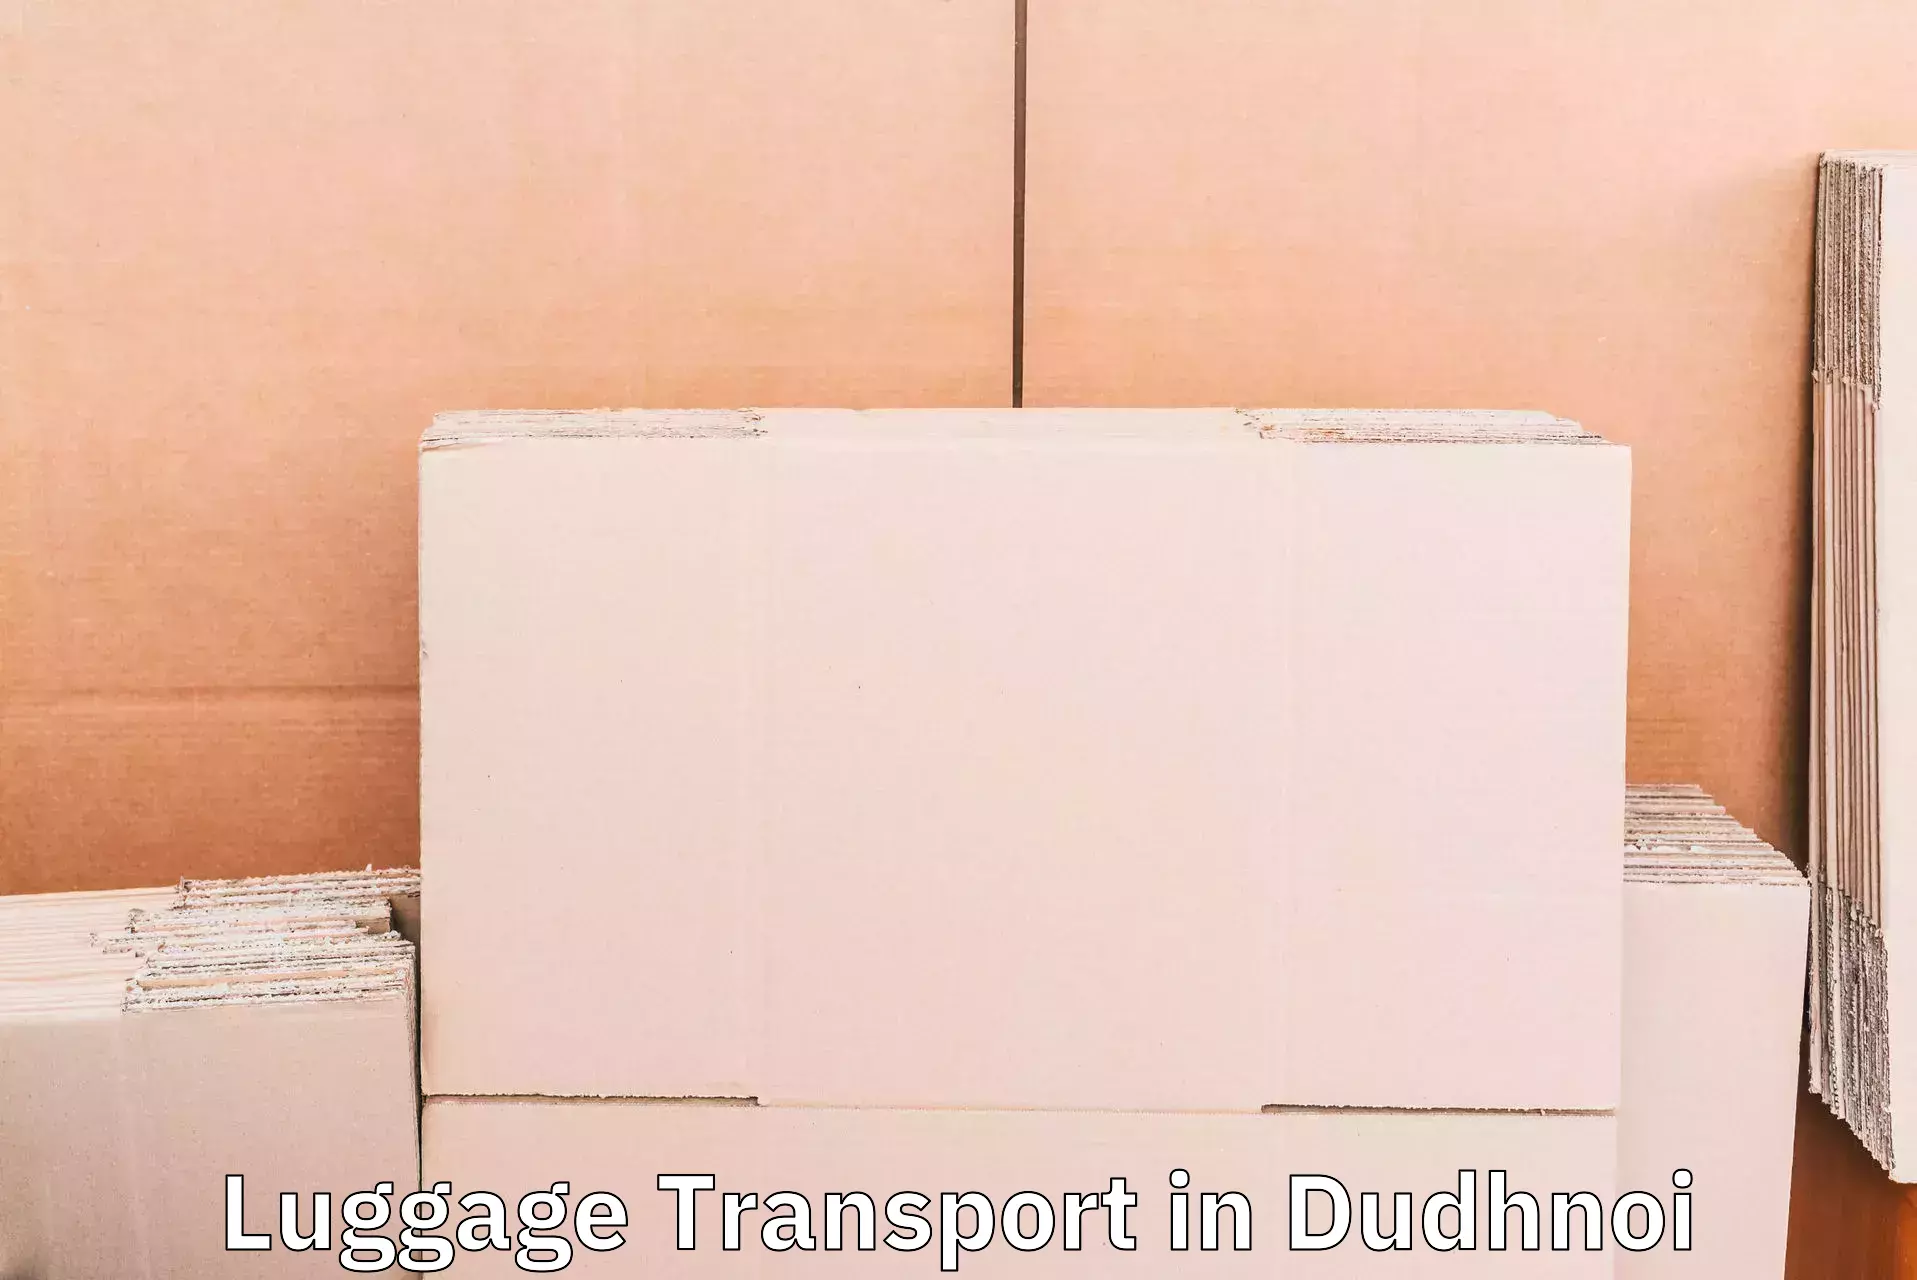 Baggage transport services in Dudhnoi